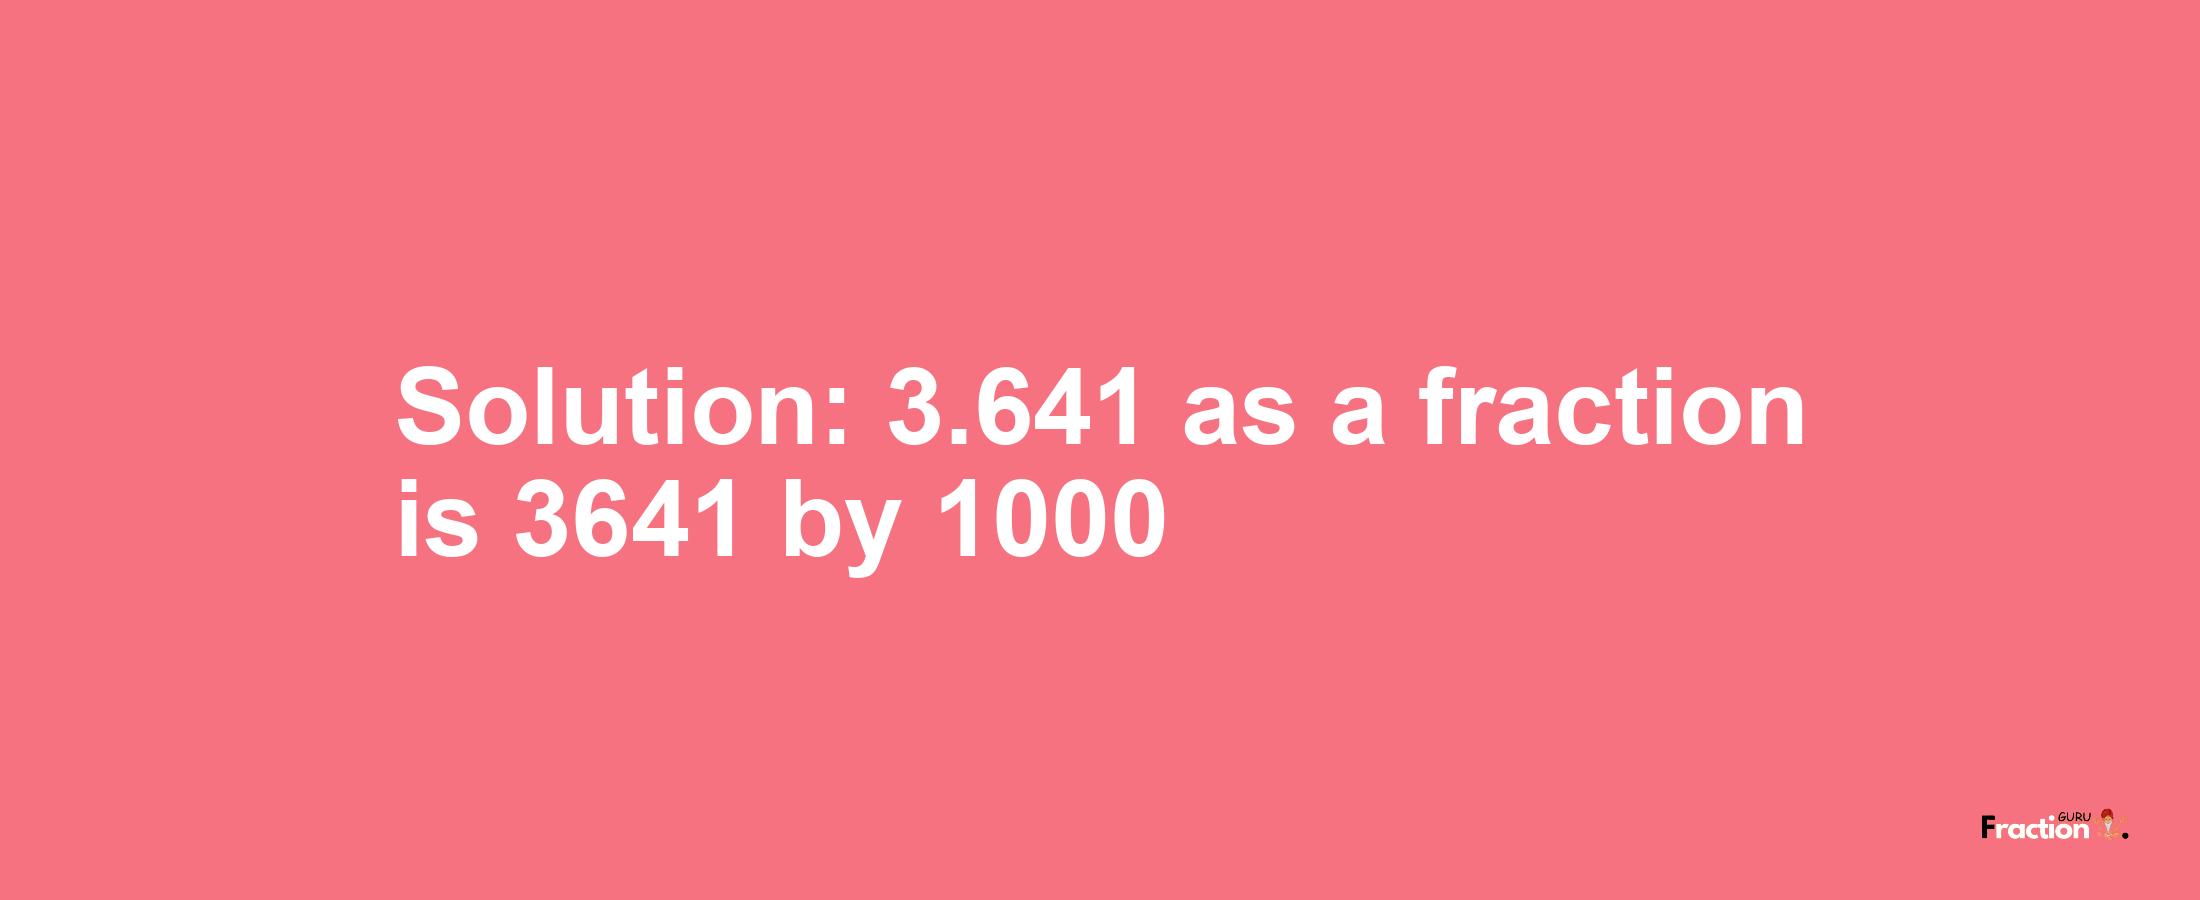 Solution:3.641 as a fraction is 3641/1000